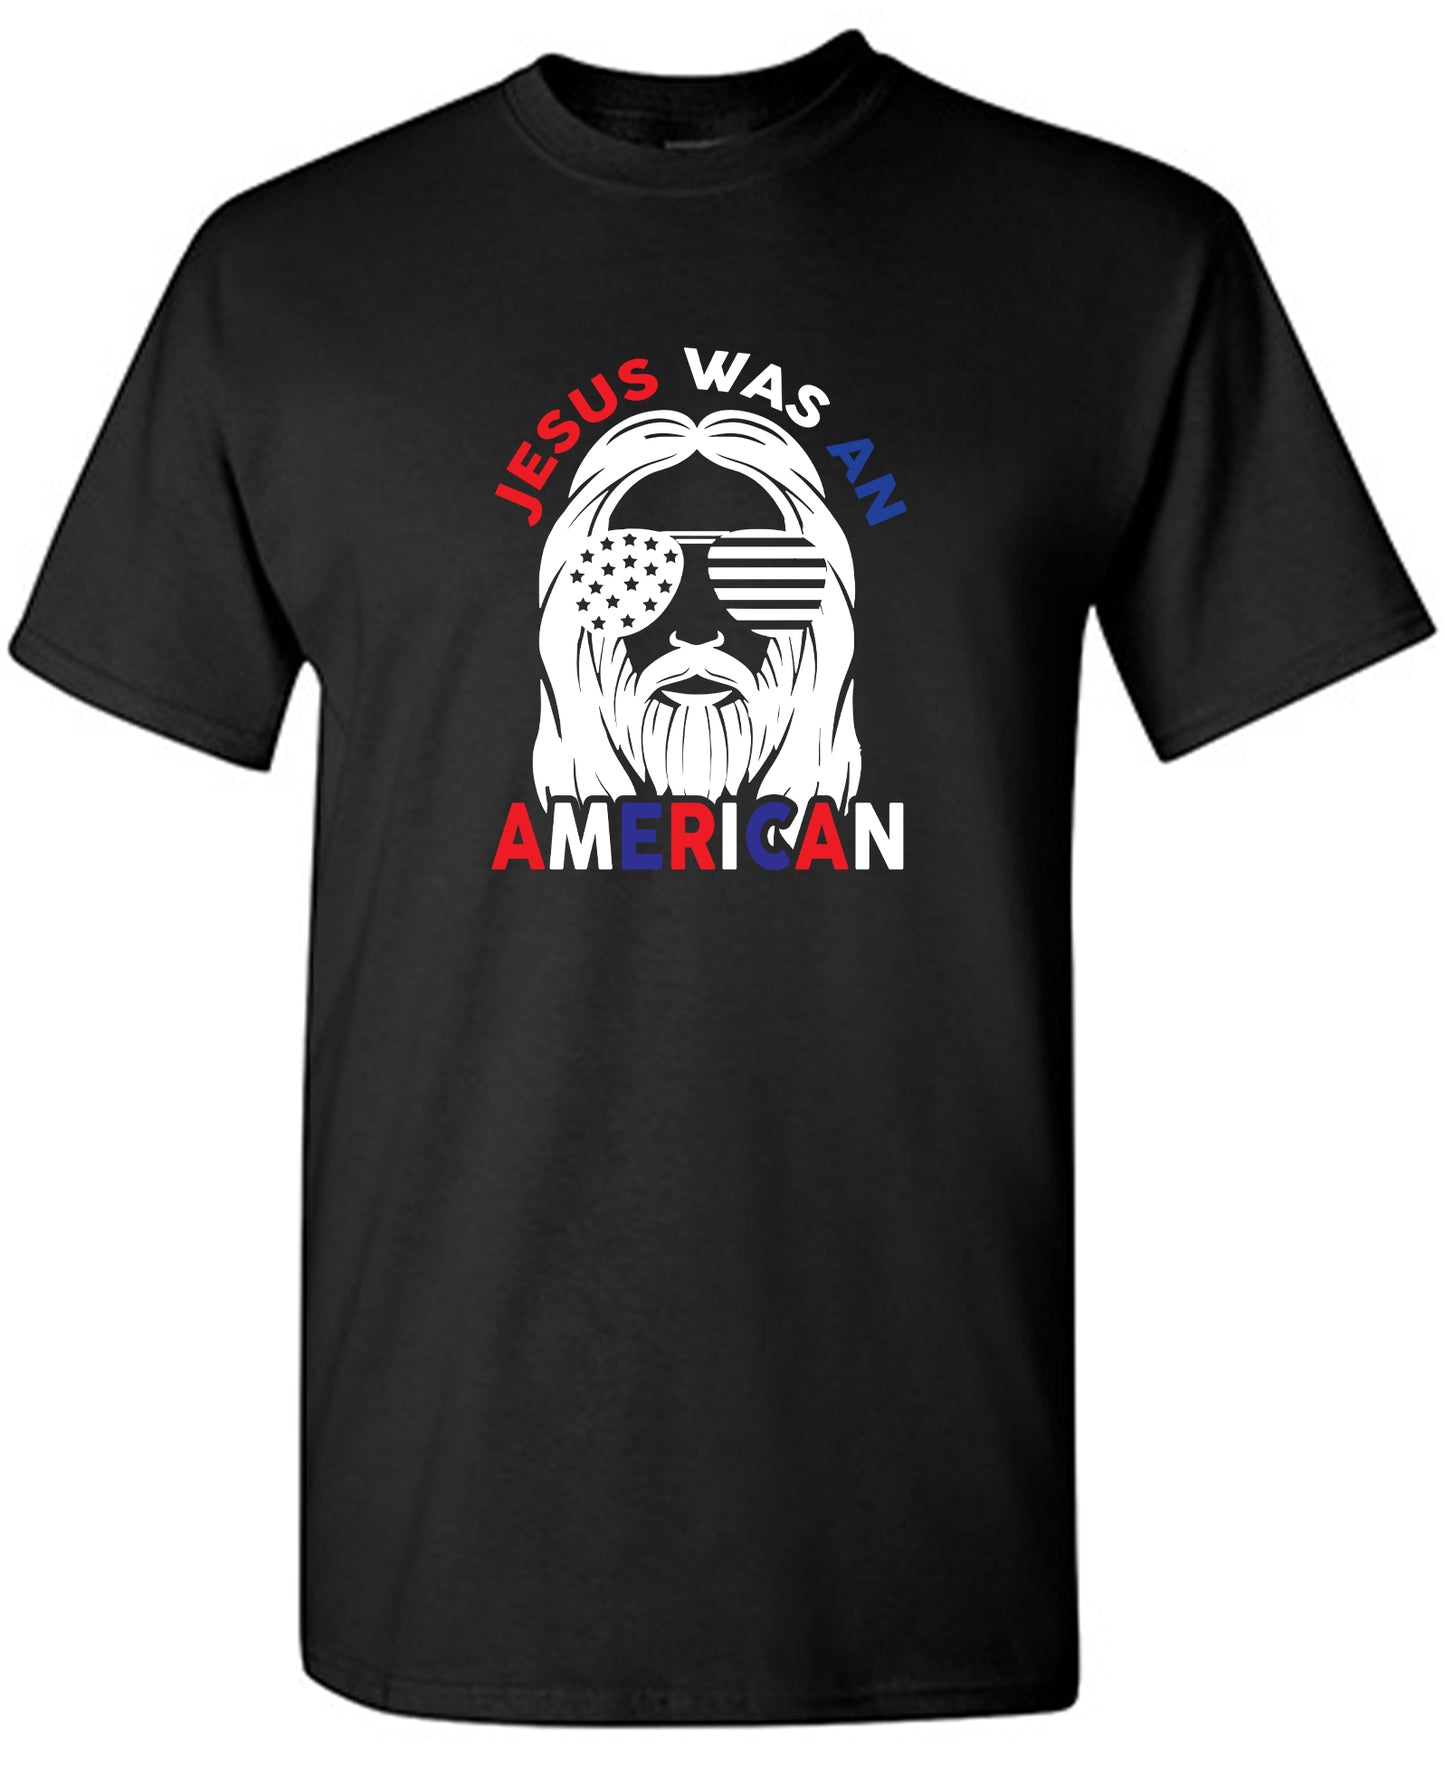 Jesus Was An American, Shirt - Funny T Shirts & Graphic Tees